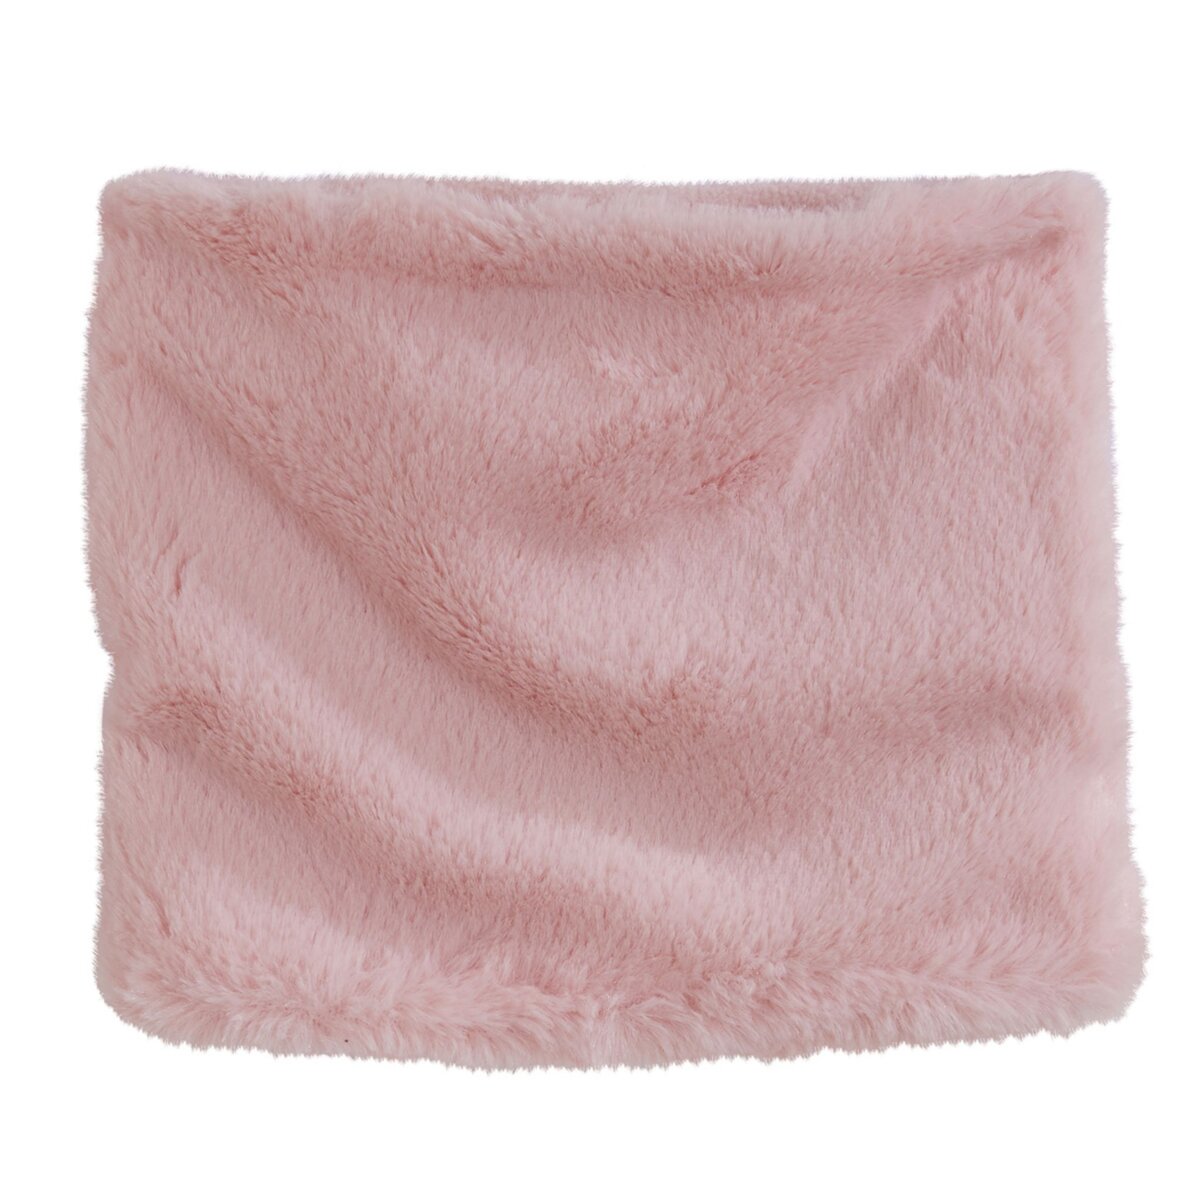 INEXTENSO Snood peluche fille 